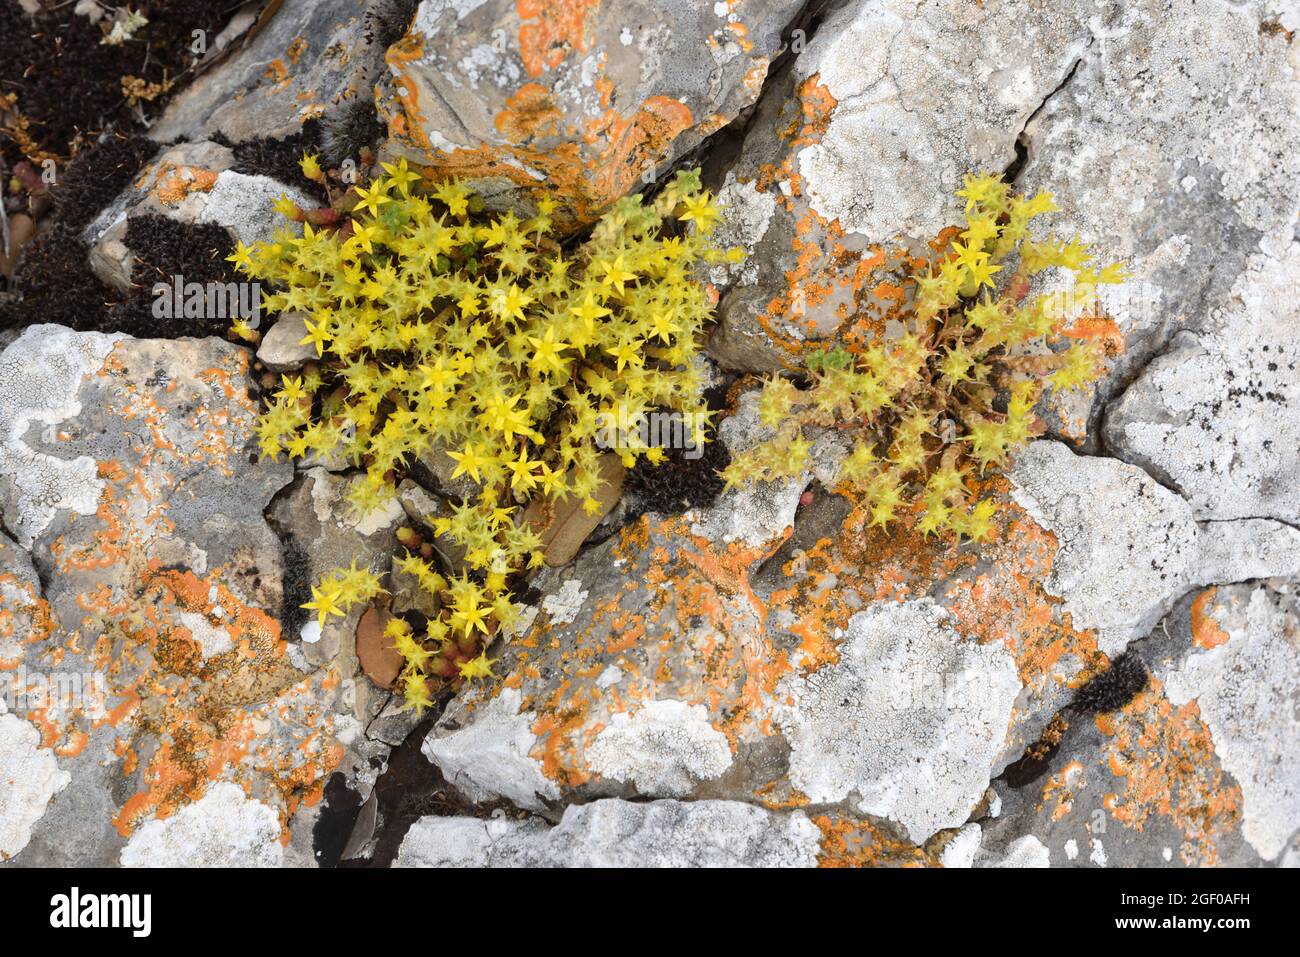 Goldmoss Stonecrop, Sedum acre, aka Mossy Stonecrop, Goldmoss Sedum, Biting Stonemoss or Wallpepper Growing on Lichen-covered Rocks Provence France Stock Photo